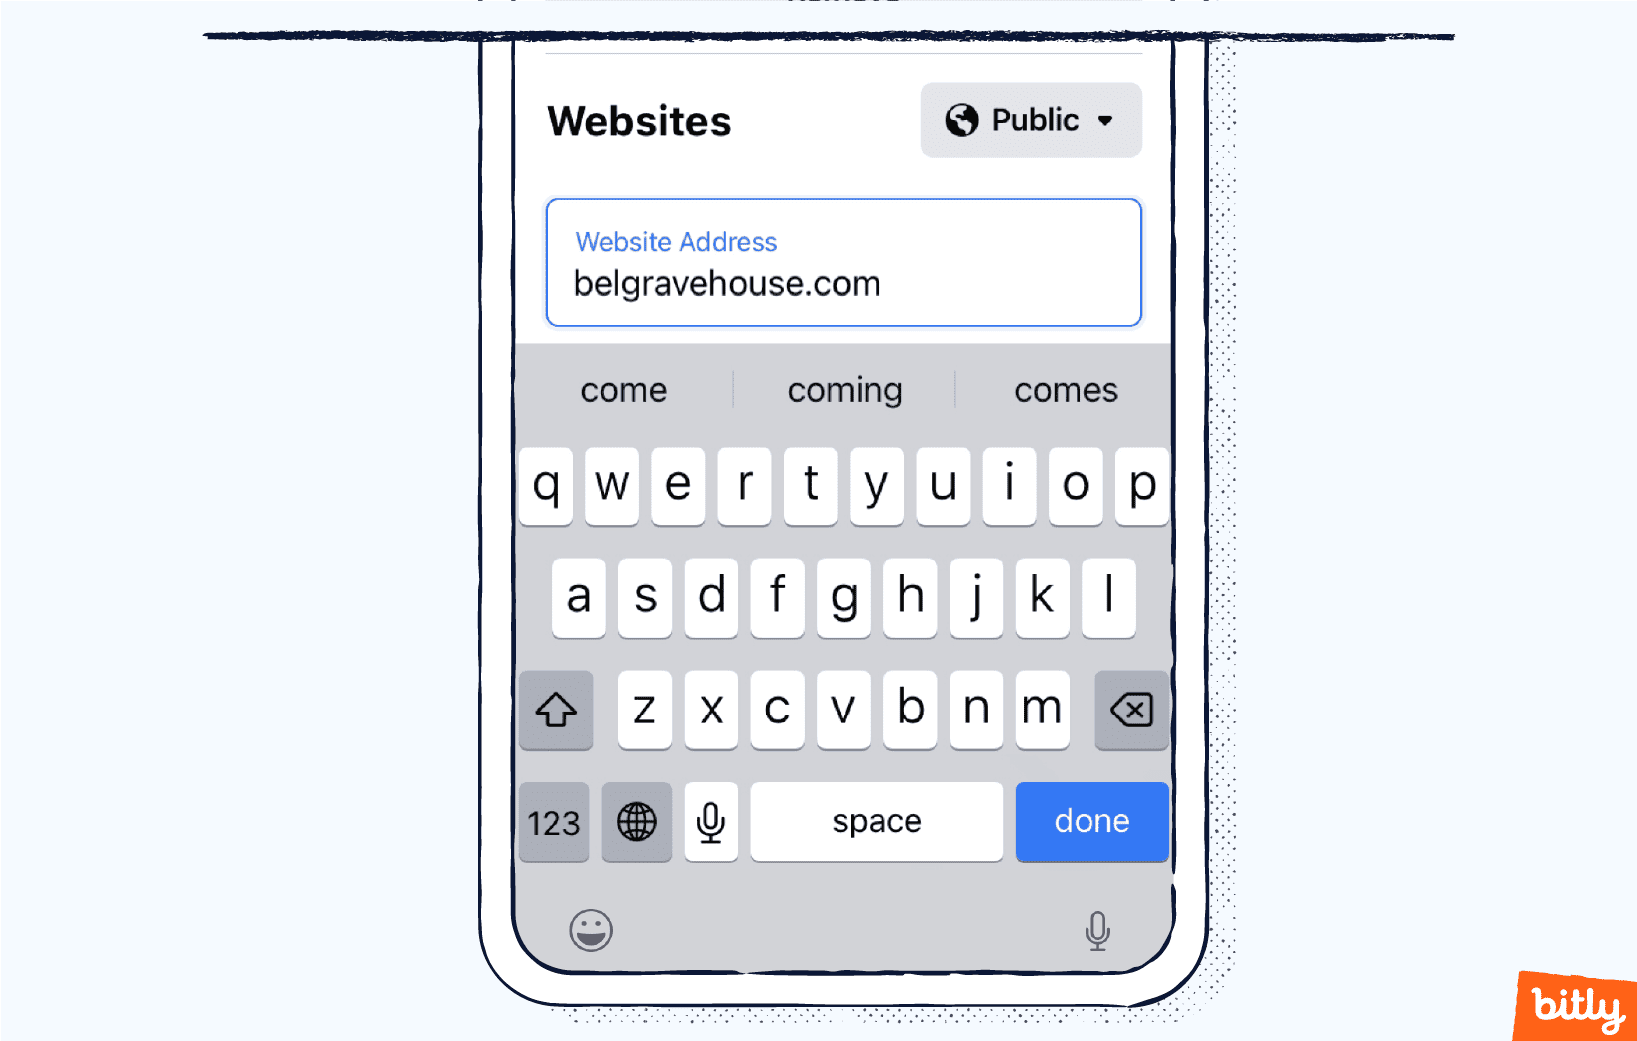 A smartphone's keyboard with "belgravehouse.com" typed into a Website address field.